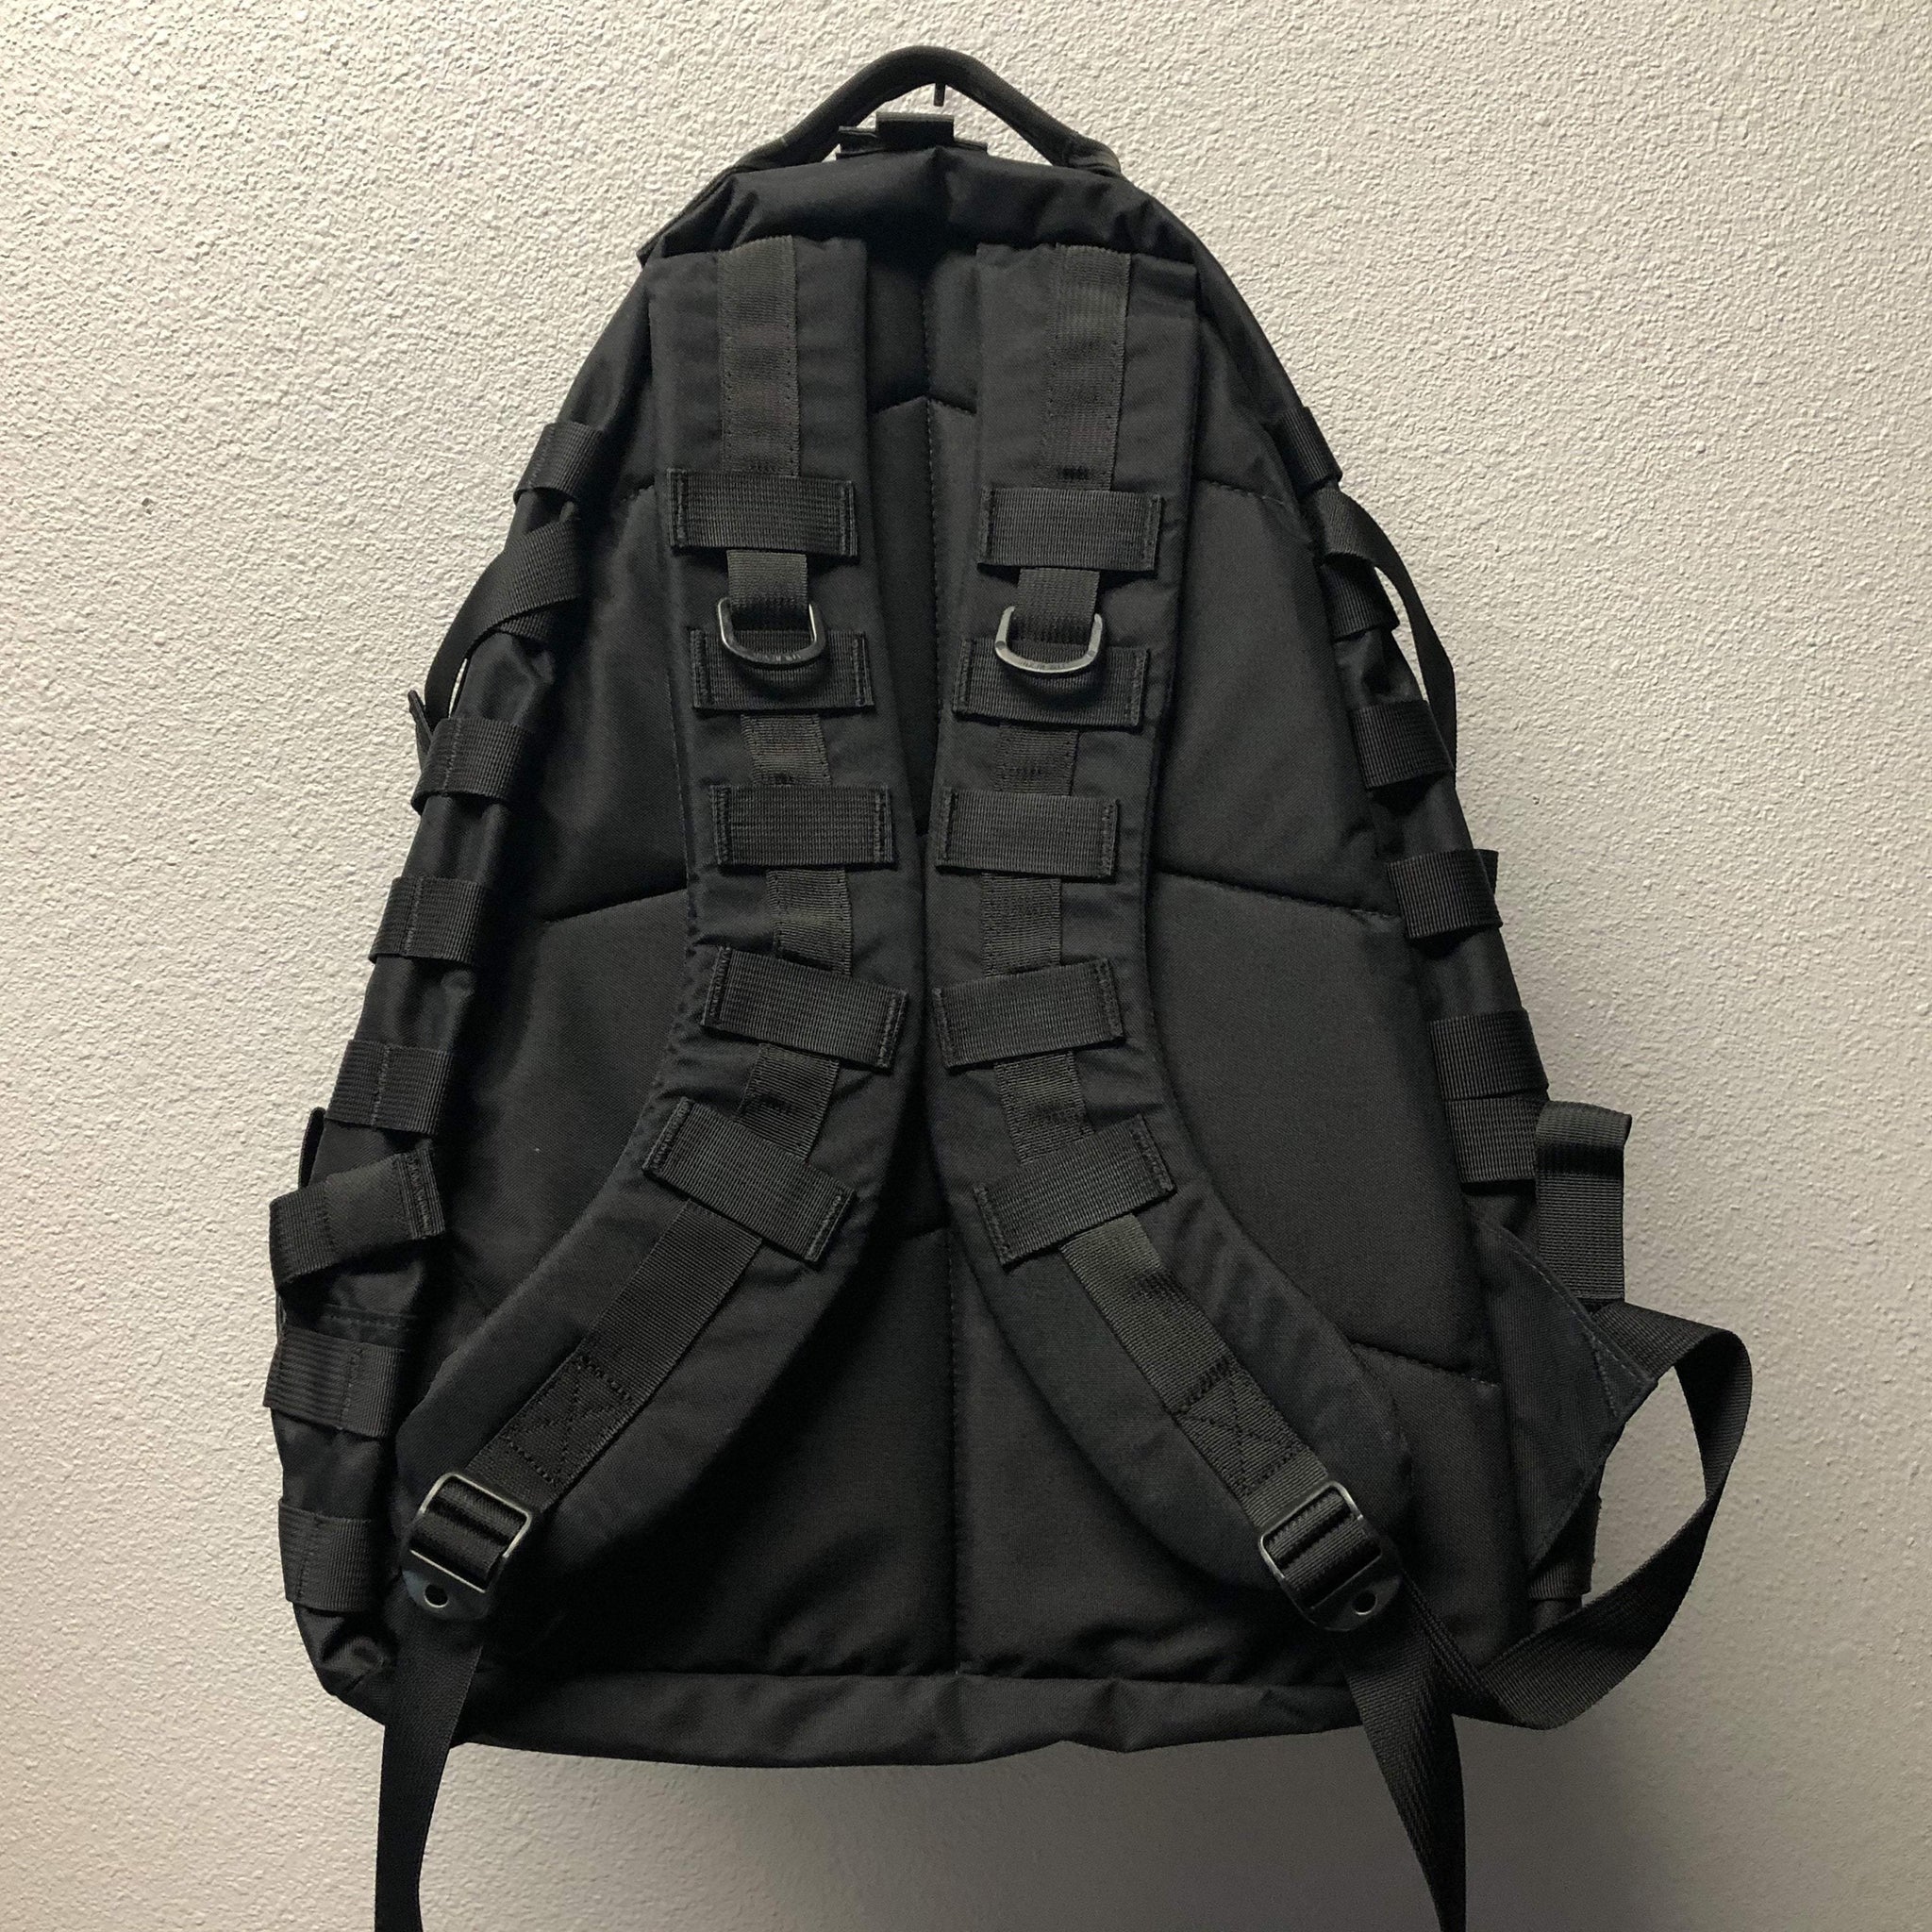 Bartact Brand New Item!!! Backpack Tactical PALS MOLLE Berry Compliant ...